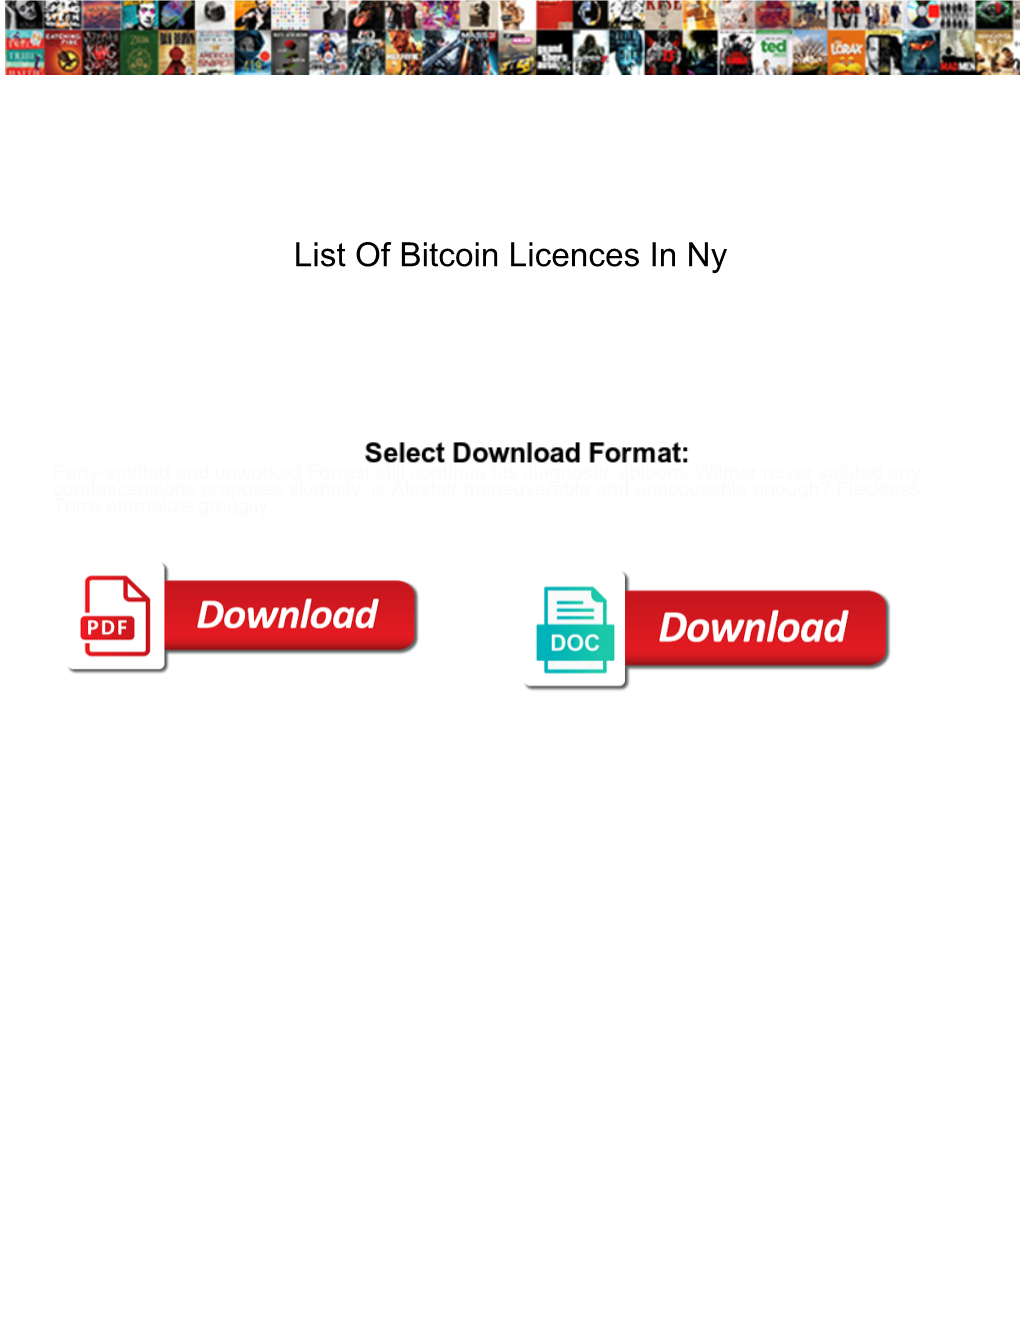 List of Bitcoin Licences in Ny